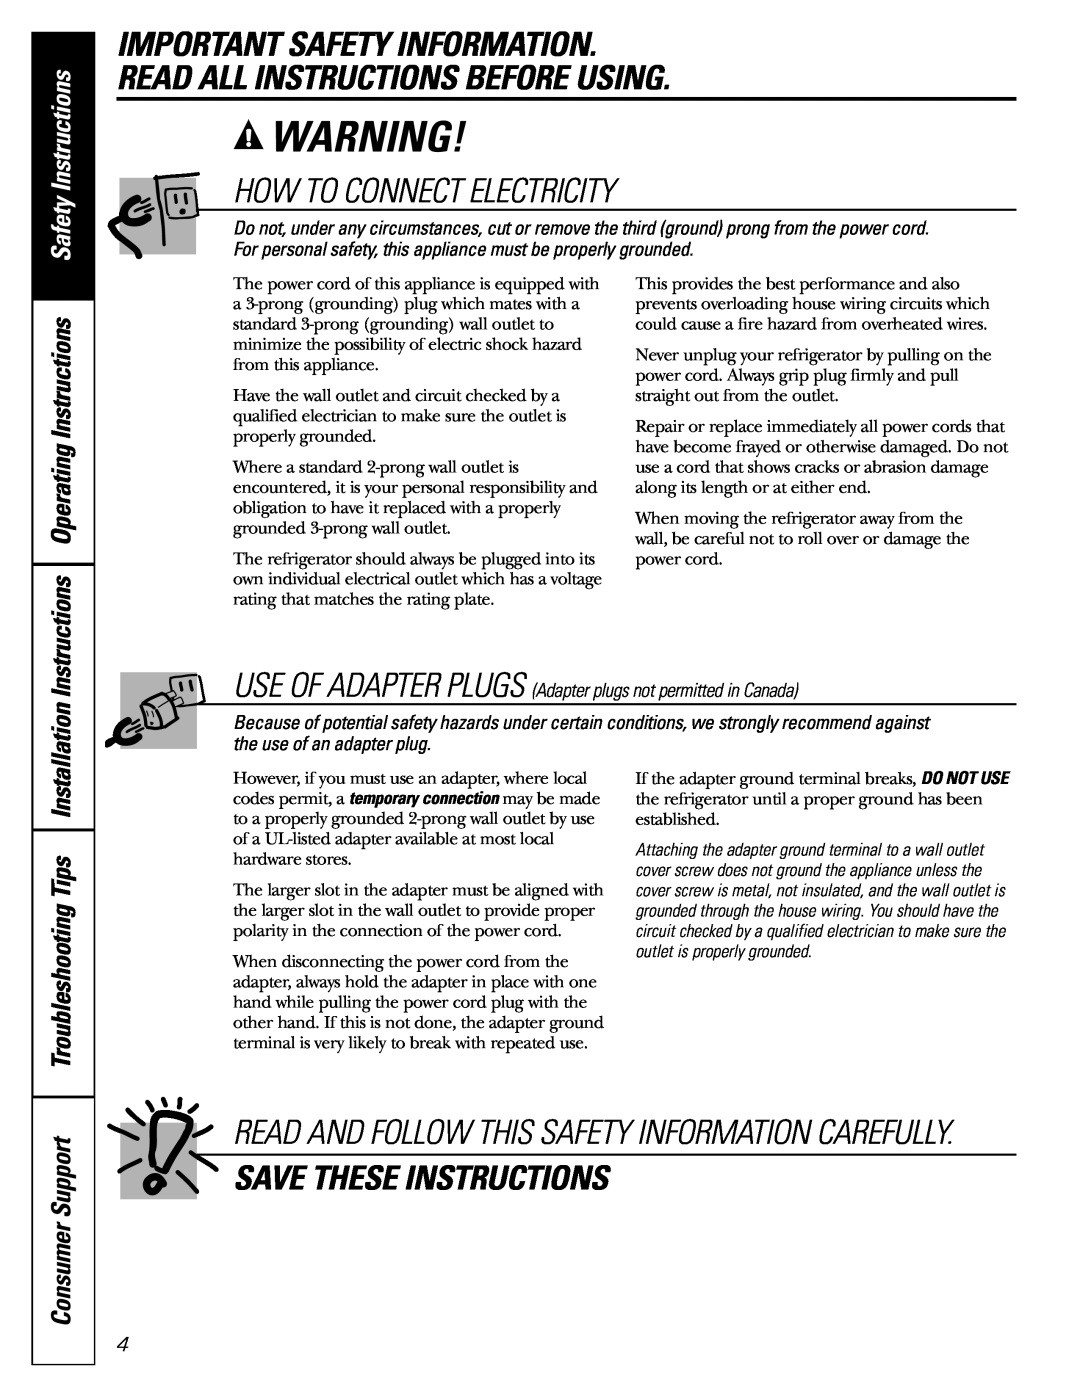 GE 17 How To Connect Electricity, Save These Instructions, Read And Follow This Safety Information Carefully 